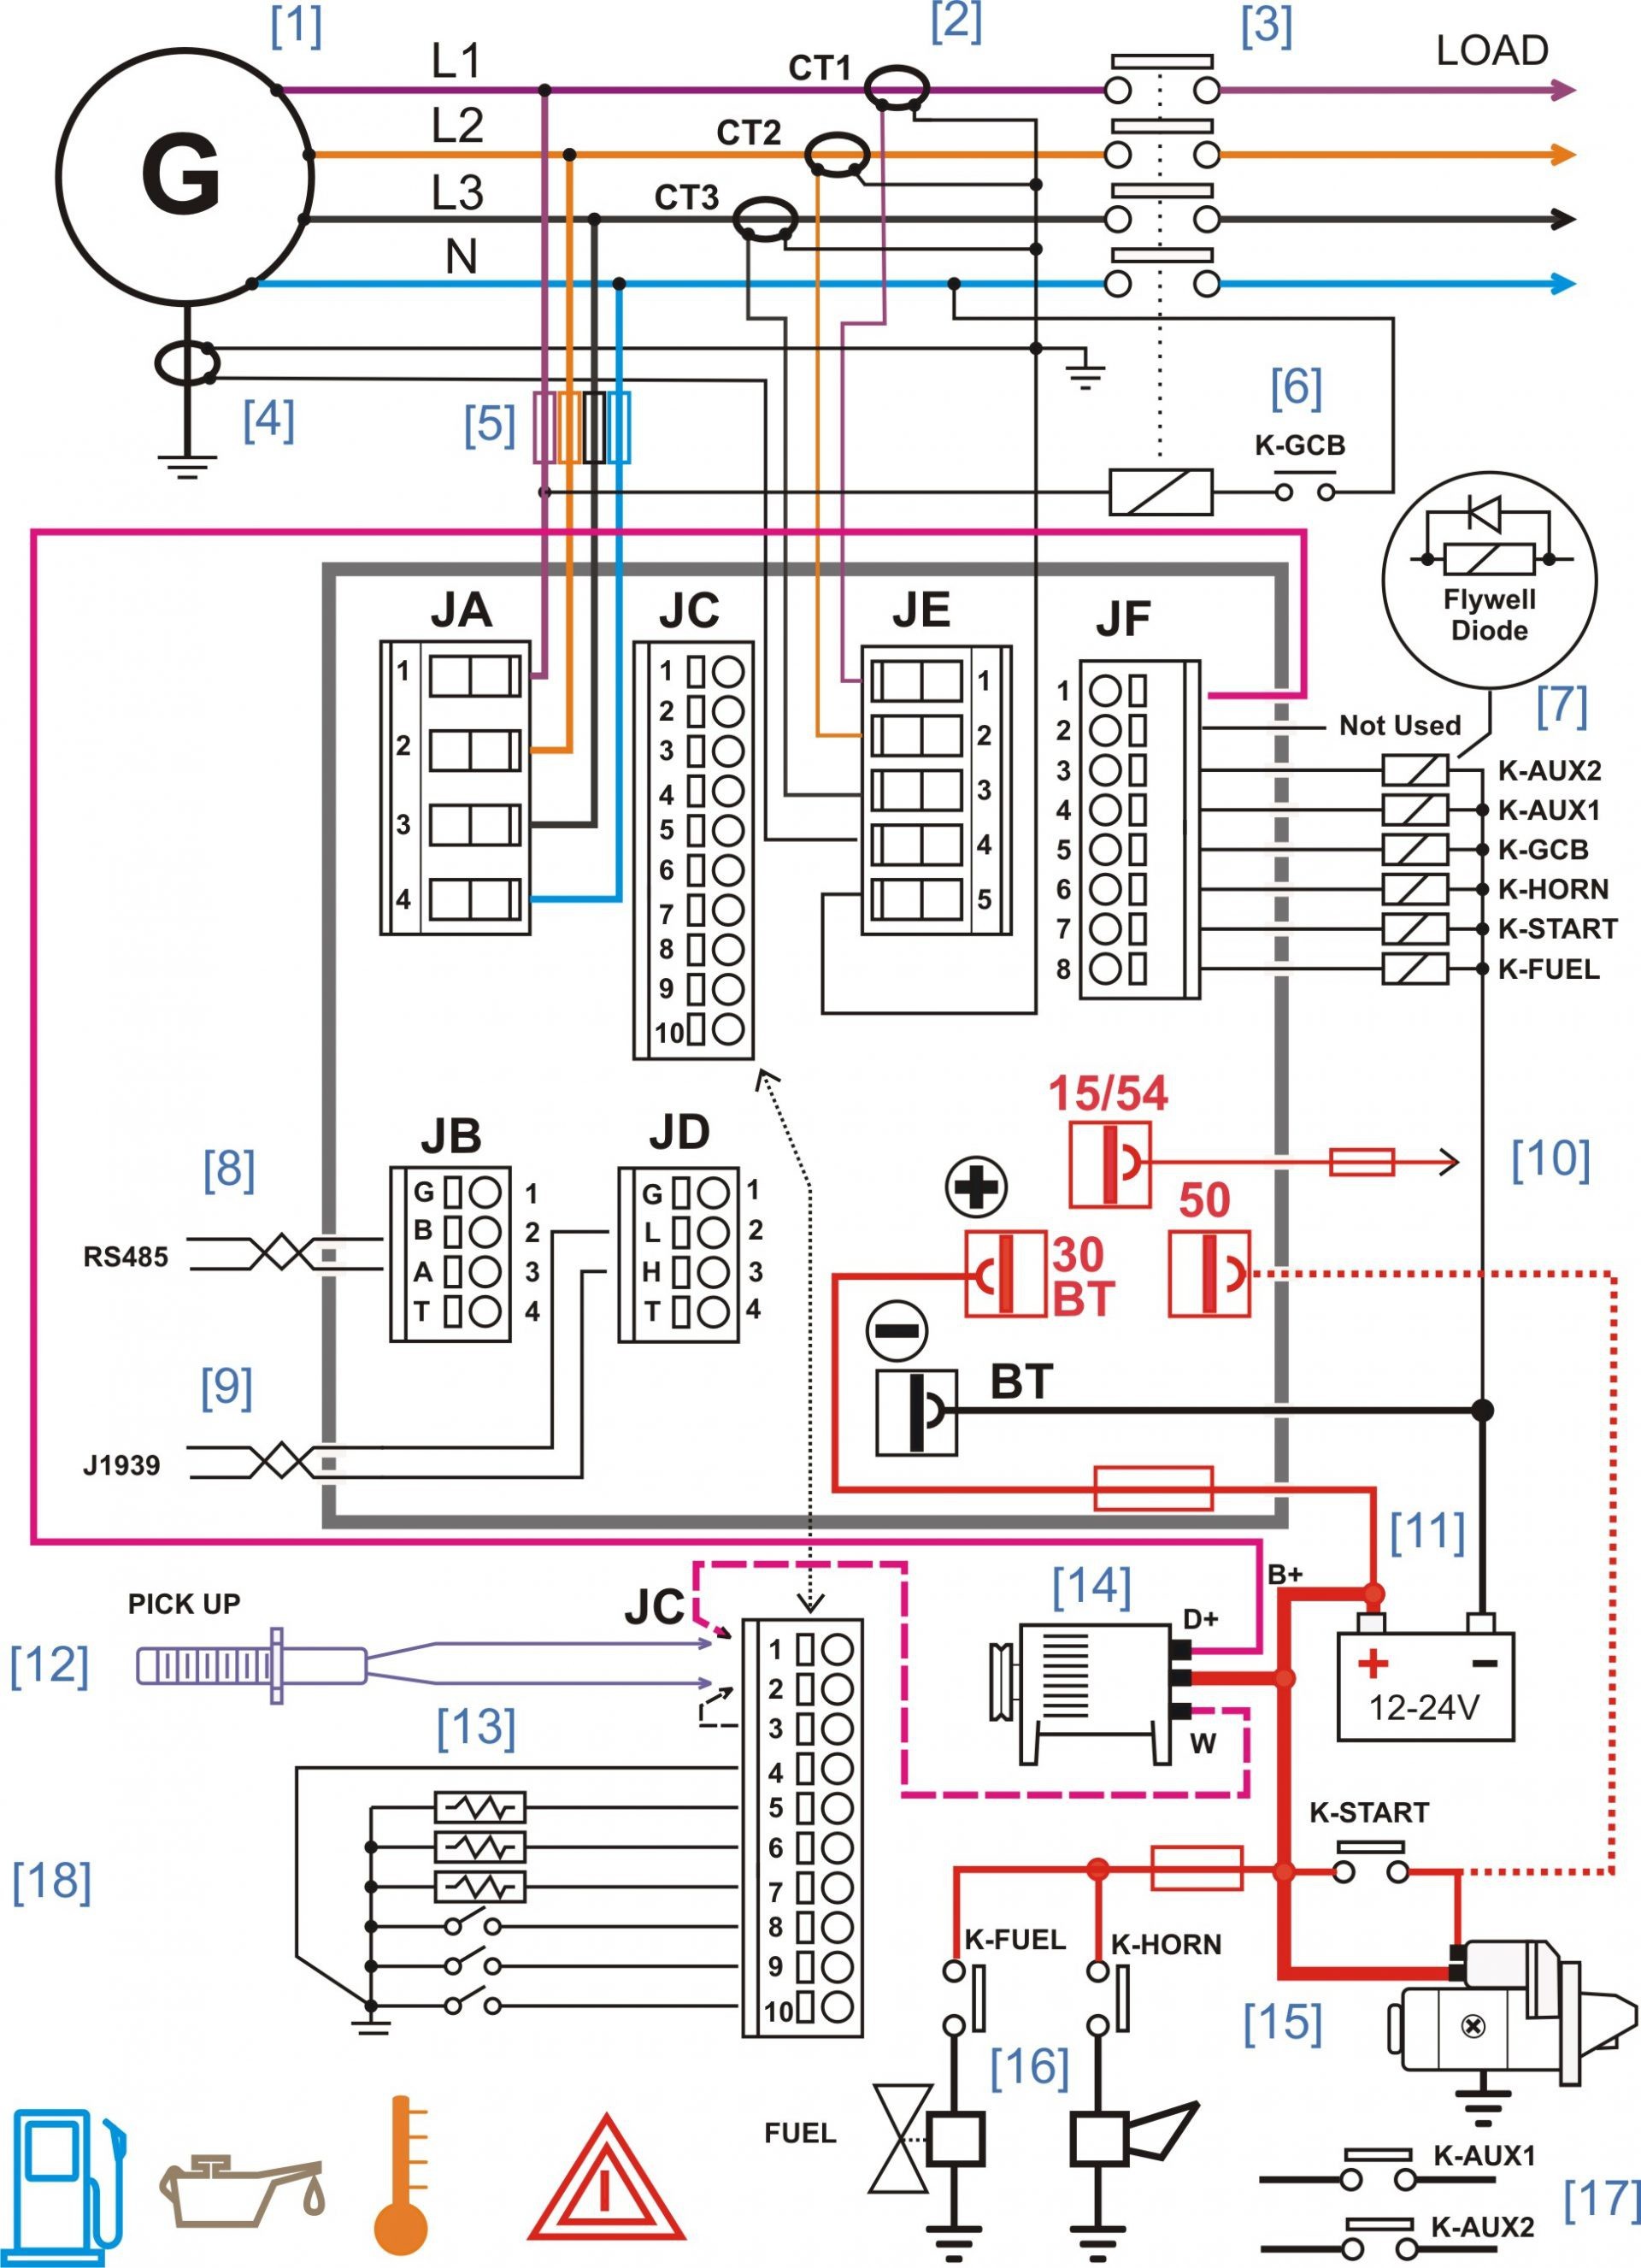 Air Horn Wiring Diagram Lovely Air Horn Wiring Diagram Switch Stebel Nautilus Pact Motorcycle